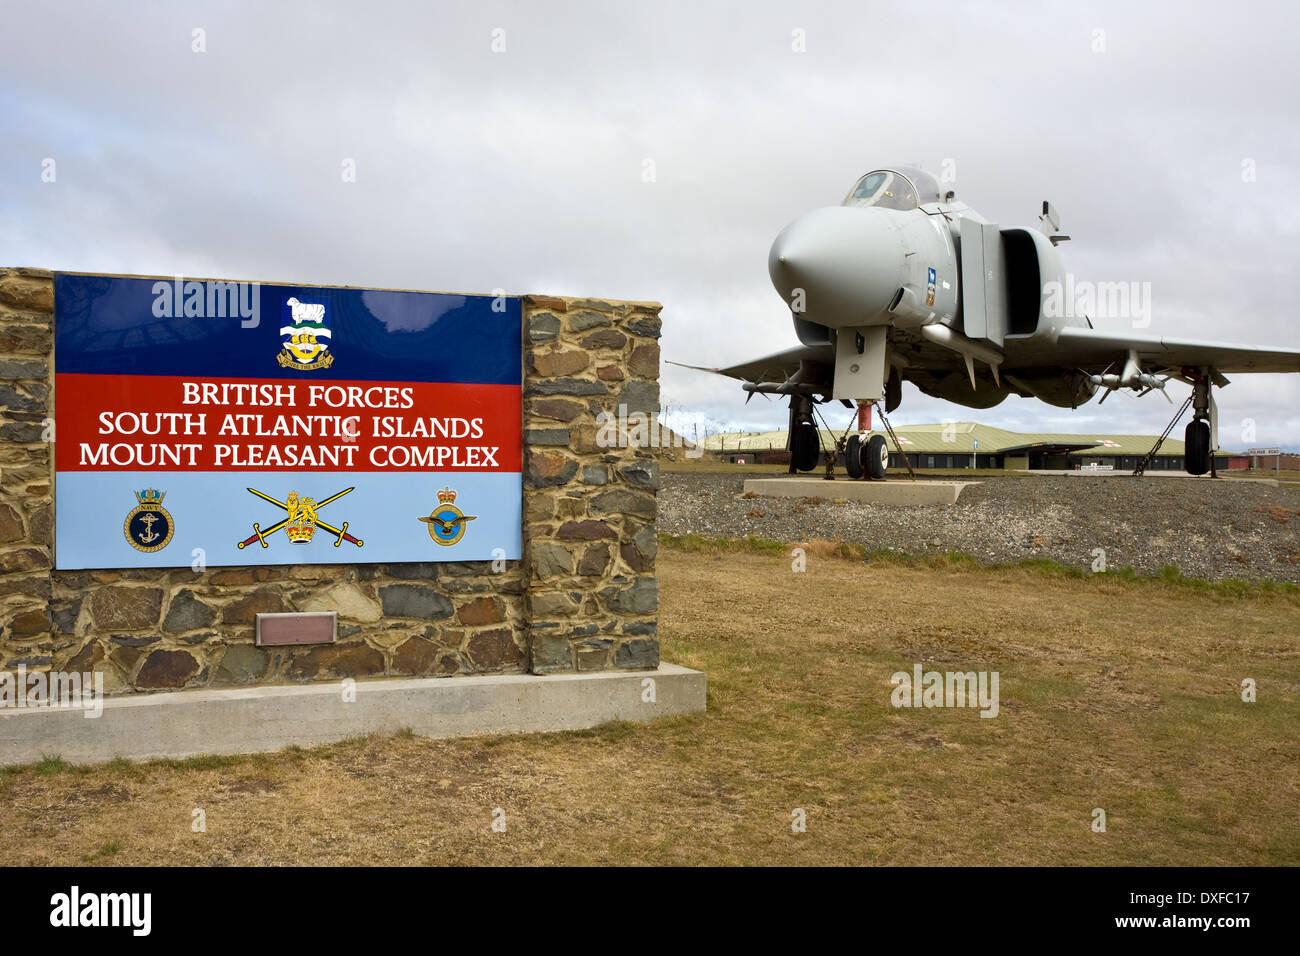 An old Phantom Jet Fighter at Mount Pleasant Airbase in the Falkland Islands (Islas Malvinas). Stock Photo